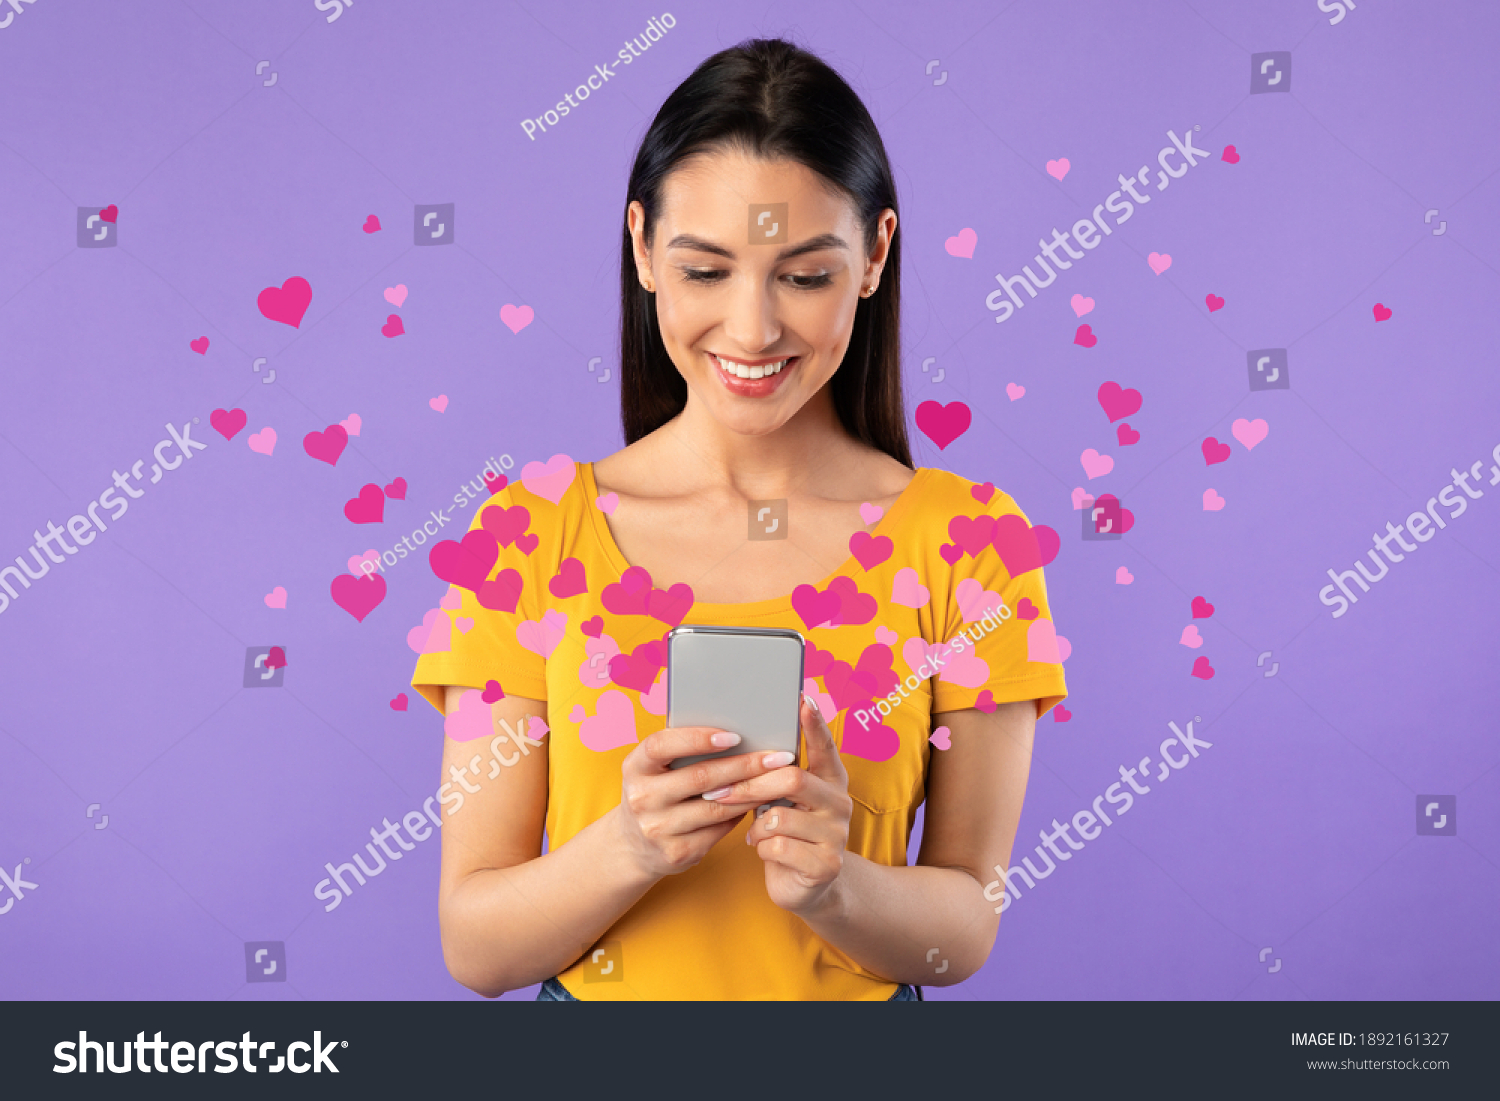 Love Mail Concept. Smiling young woman using smartphone, receiving love text message with pink hearts flying away from gadget screen isolated on purple studio background. Dating App. #1892161327